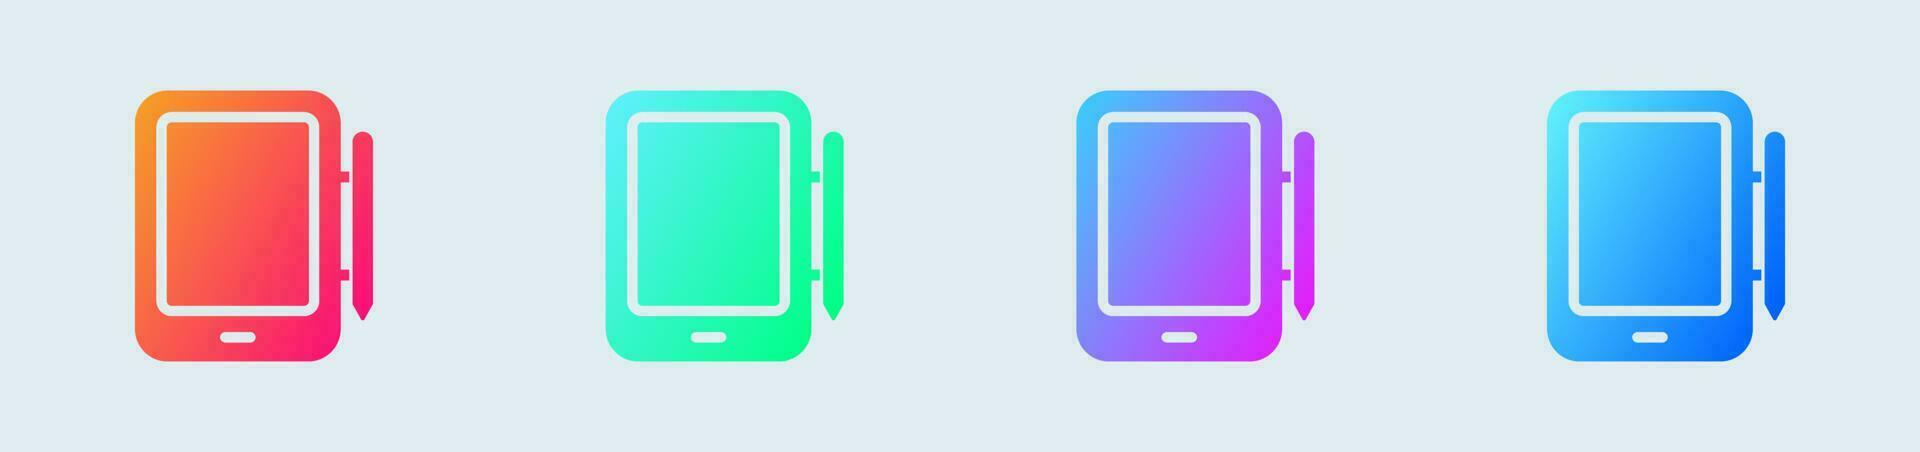 Tablet solid icon in gradient colors. Device signs vector illustration.